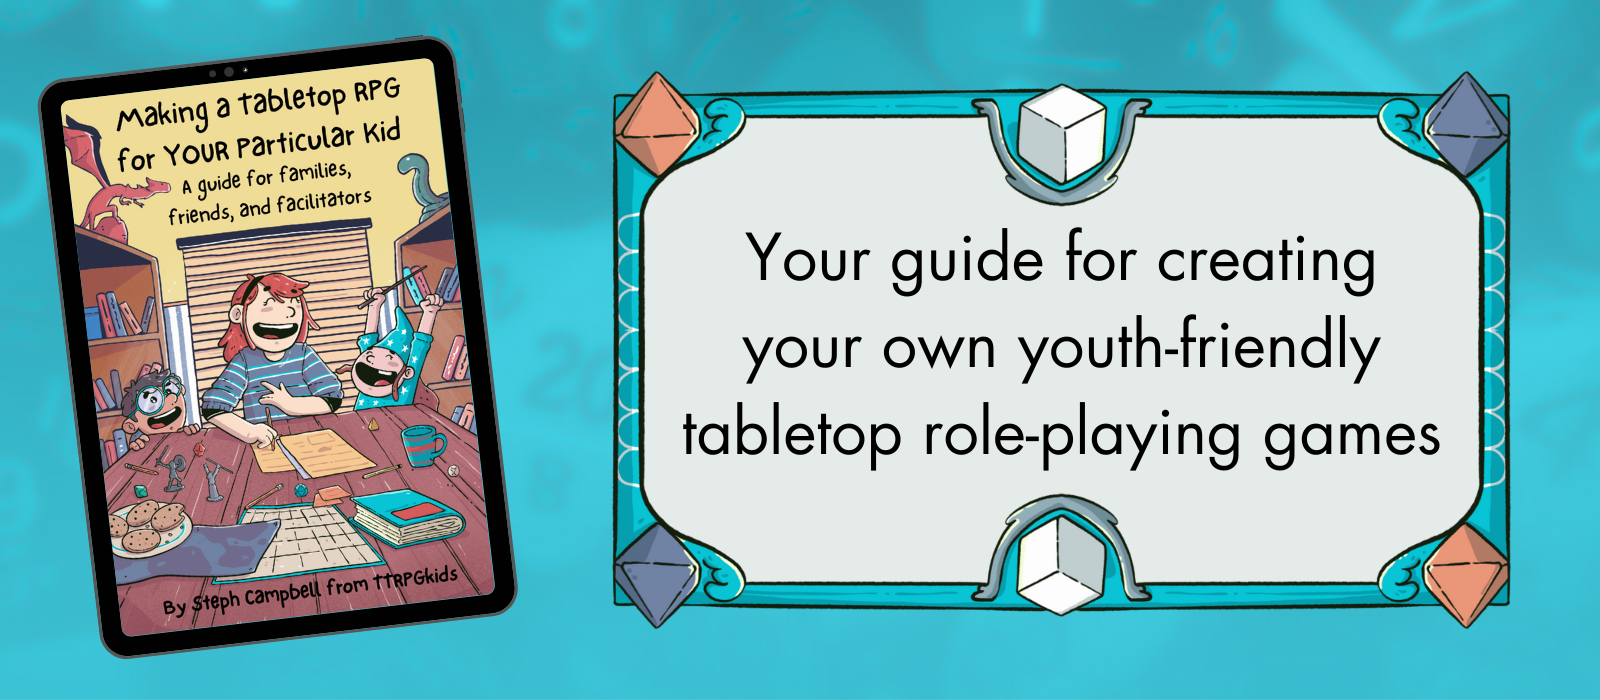 Making a Tabletop RPG for YOUR Particular Kid: A Guide for Families, Friends, and Facilitators